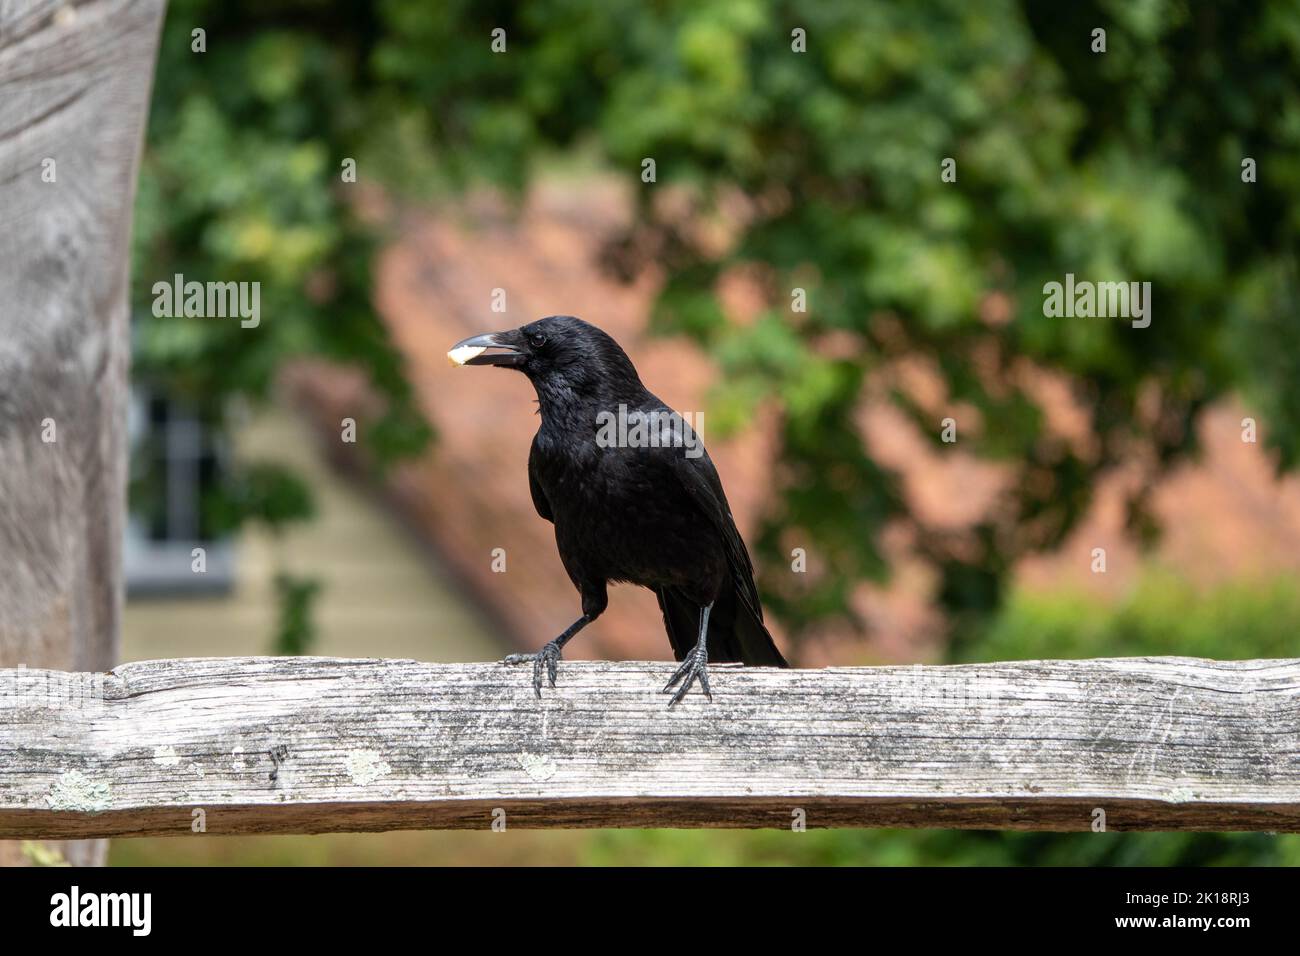 the carrion crow corvus corone a passerine bird of the family corvidae perched on a fence with food in beak and a blurred background Stock Photo